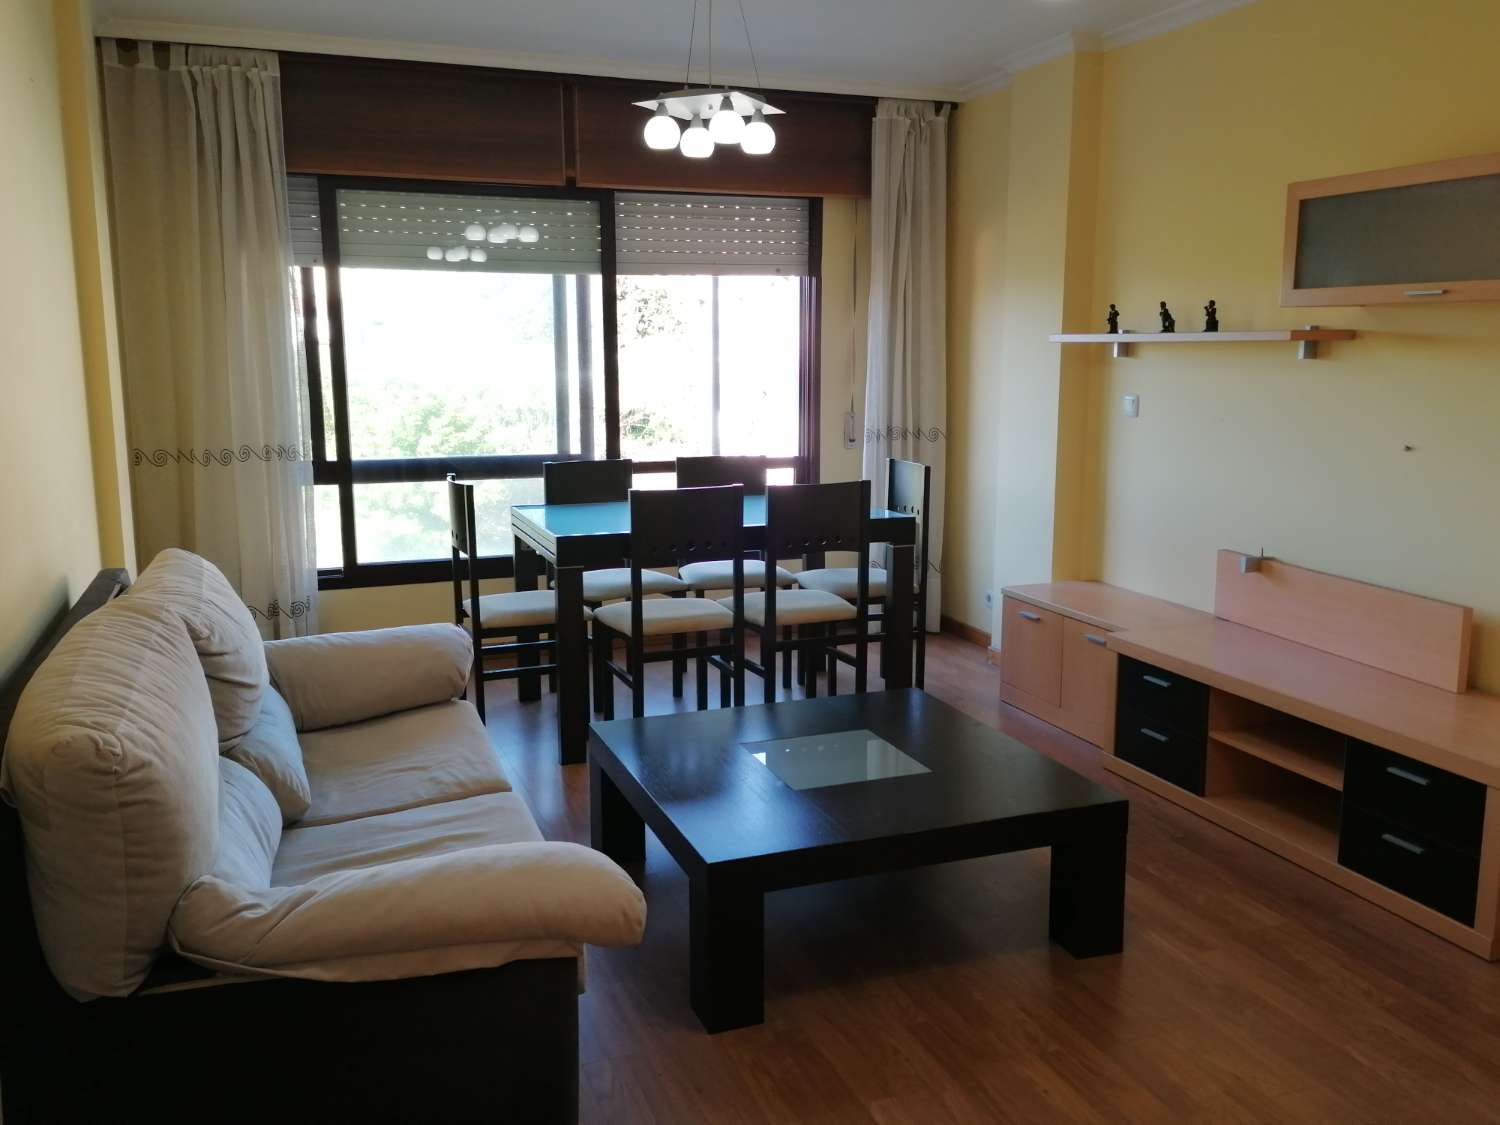 Raxo: A7156: Apartment with sea views... 300 meters from the beach...